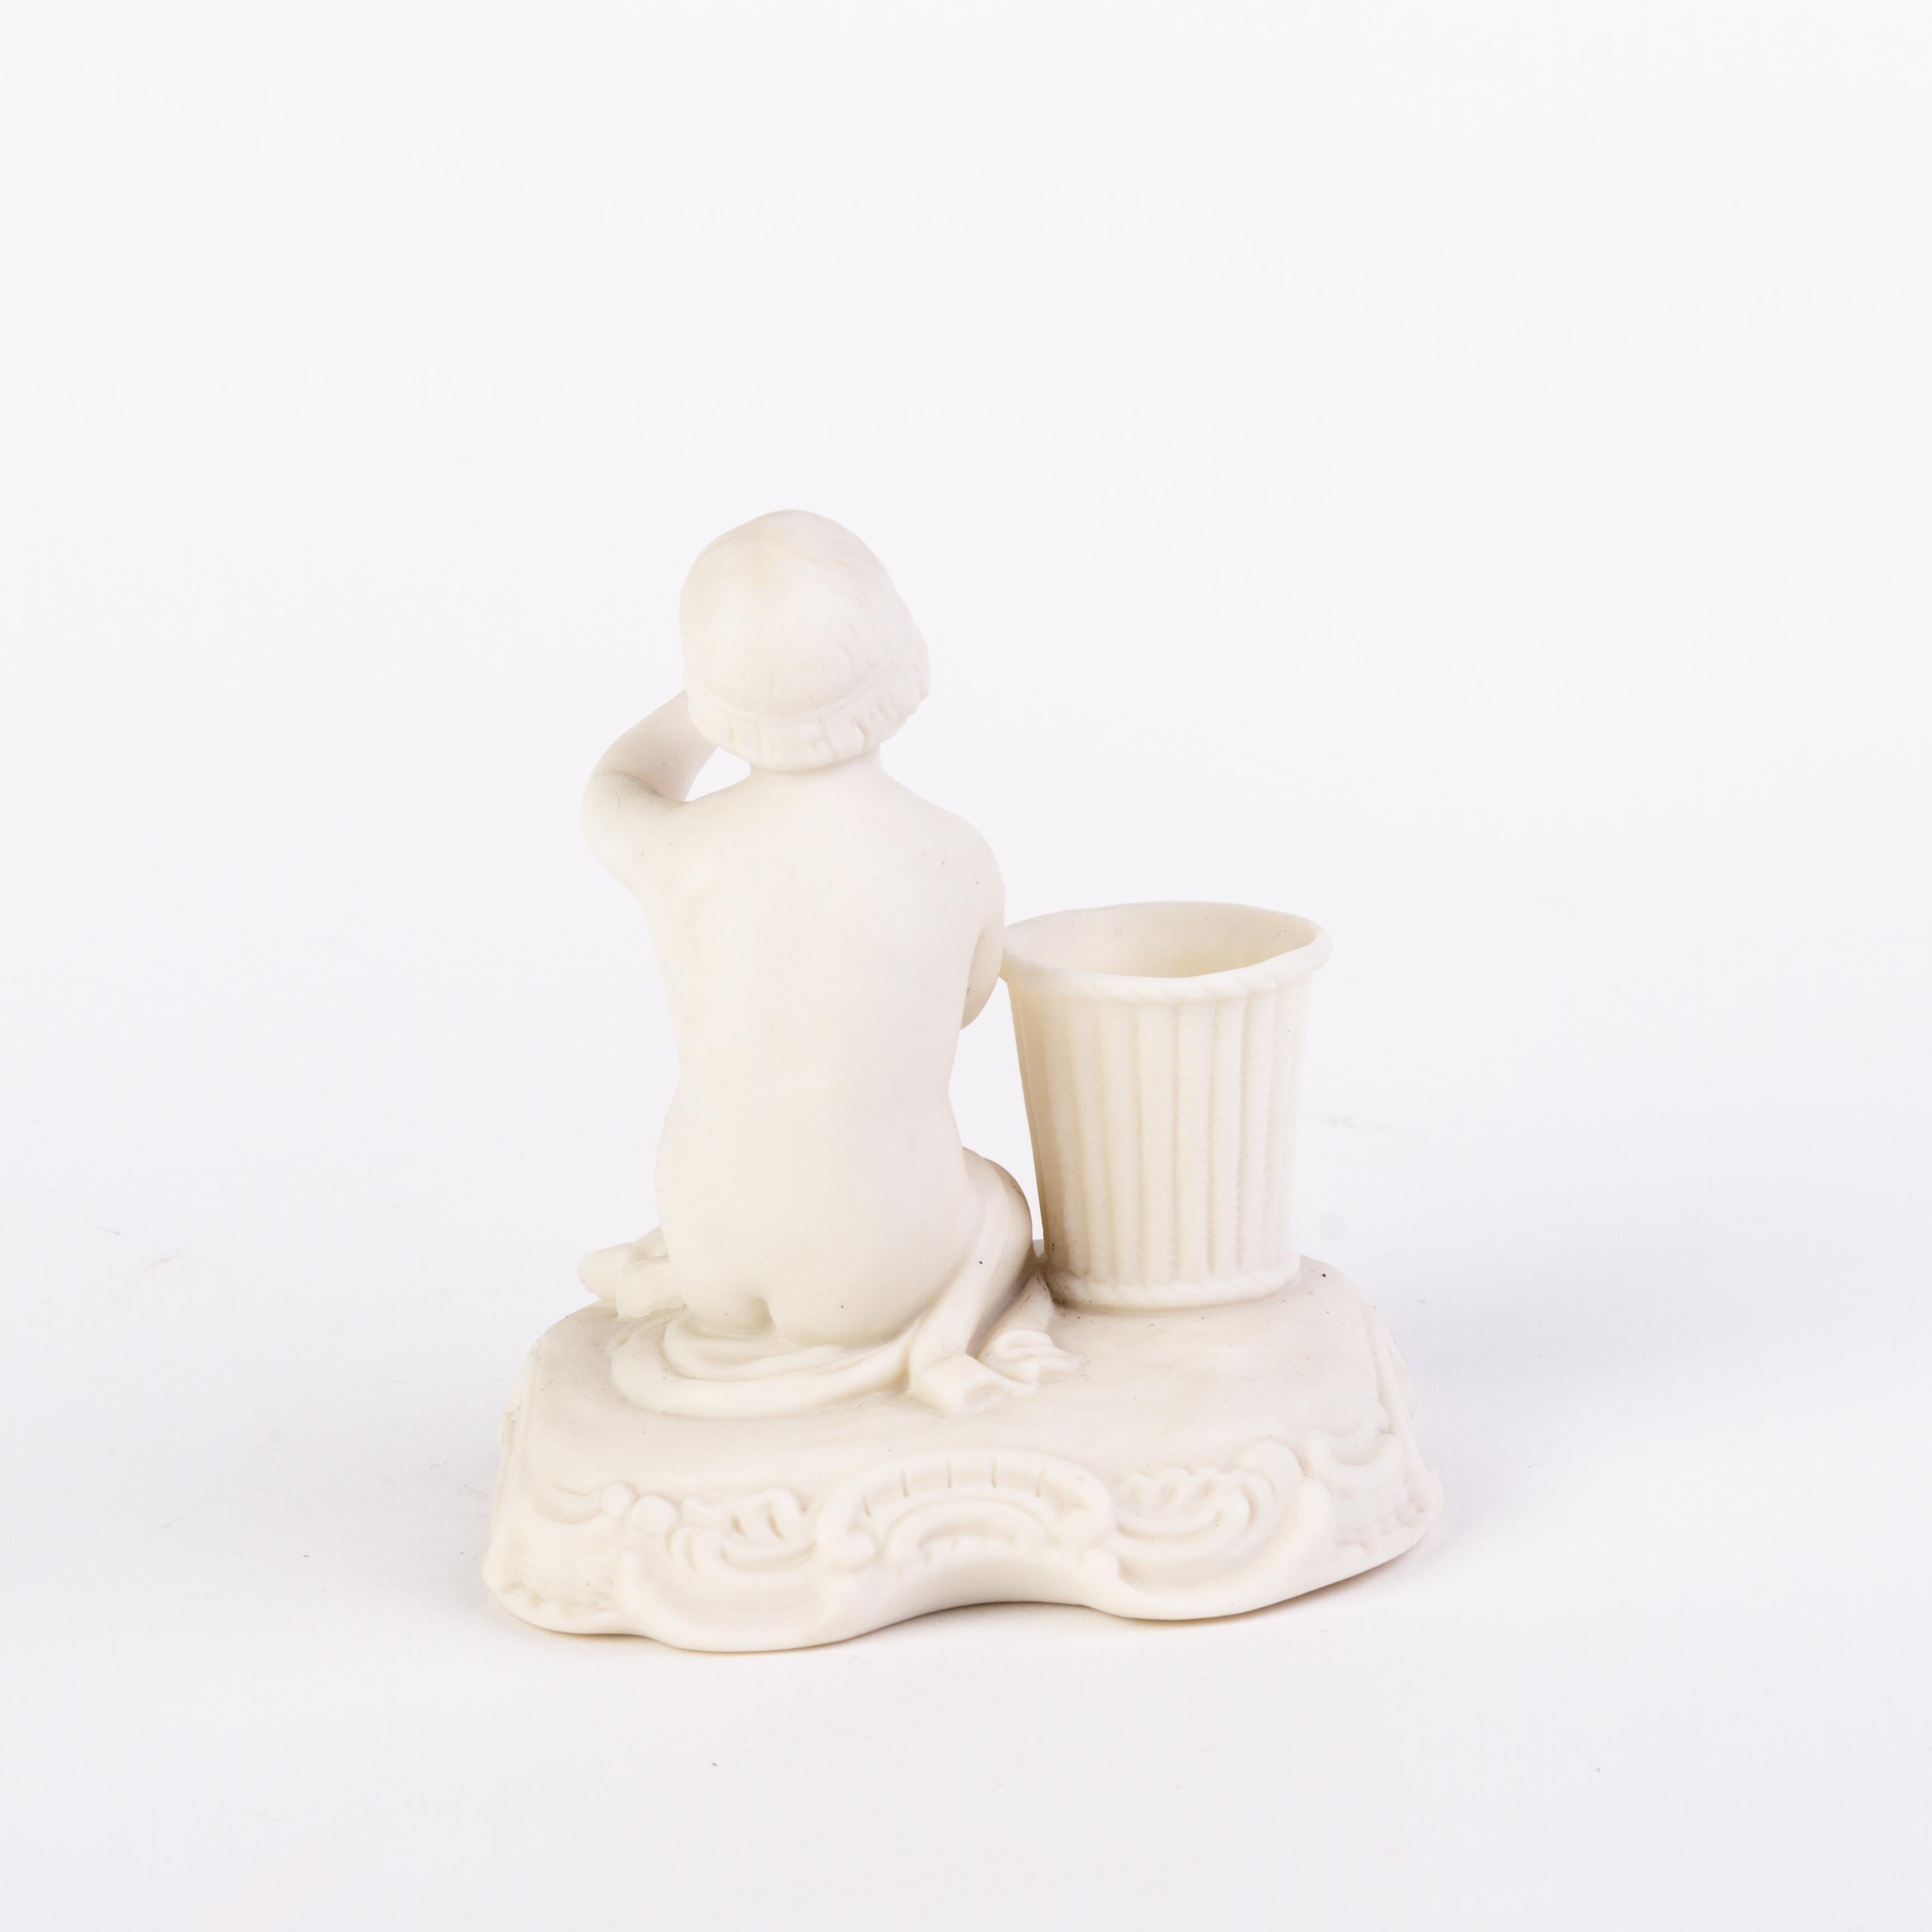 Victorian English Copeland Parian Ware Statue Table Match Holder 19th Century In Good Condition For Sale In Nottingham, GB